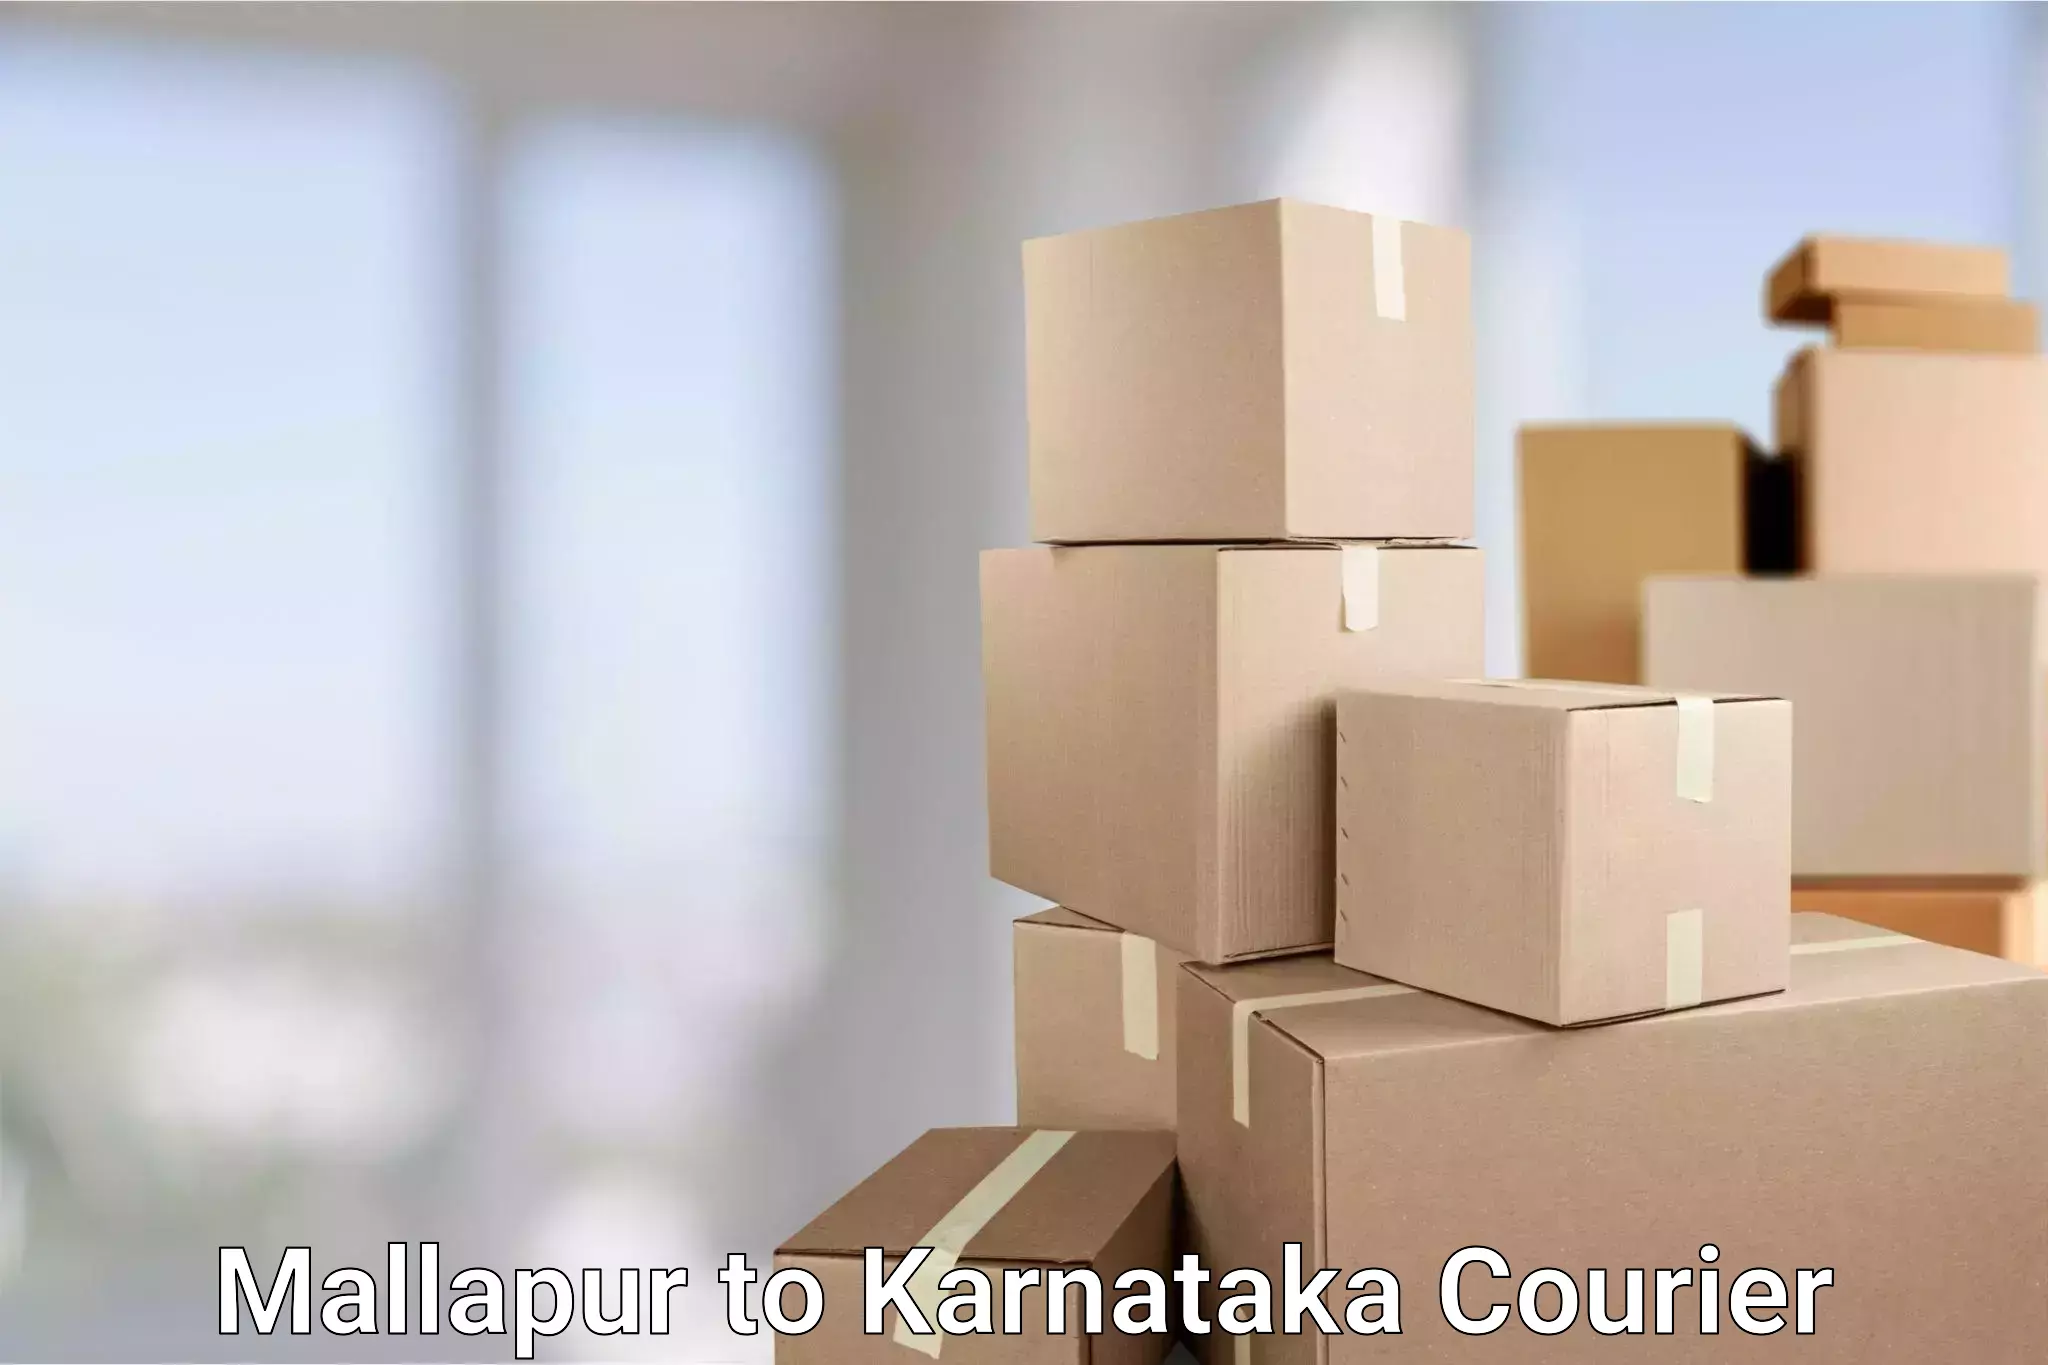 On-call courier service in Mallapur to Karnataka